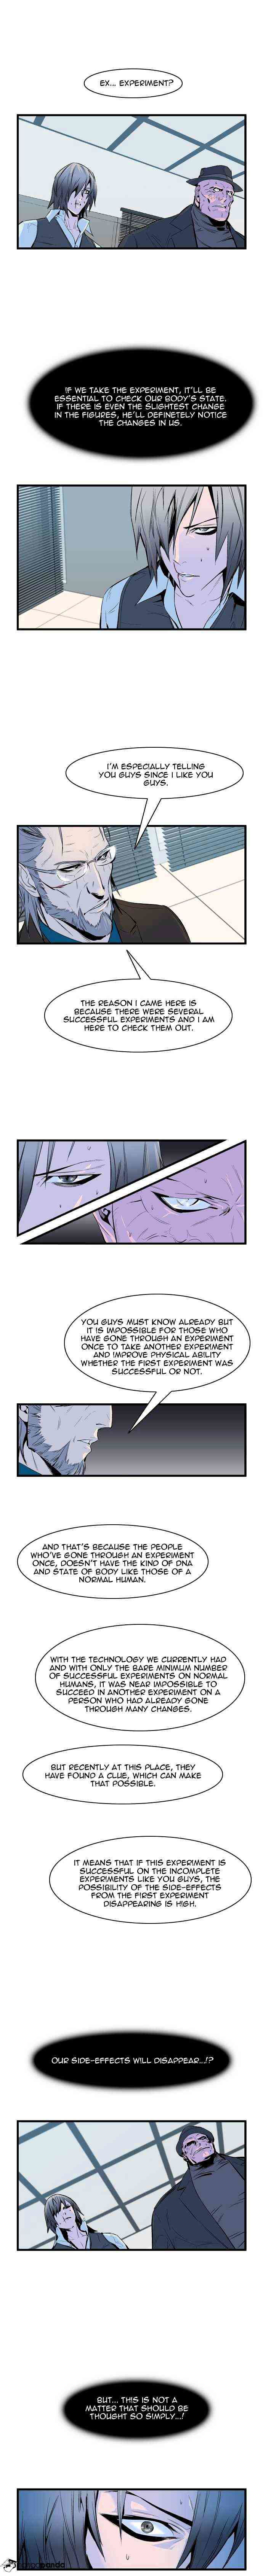 Noblesse Chapter 62 page 3